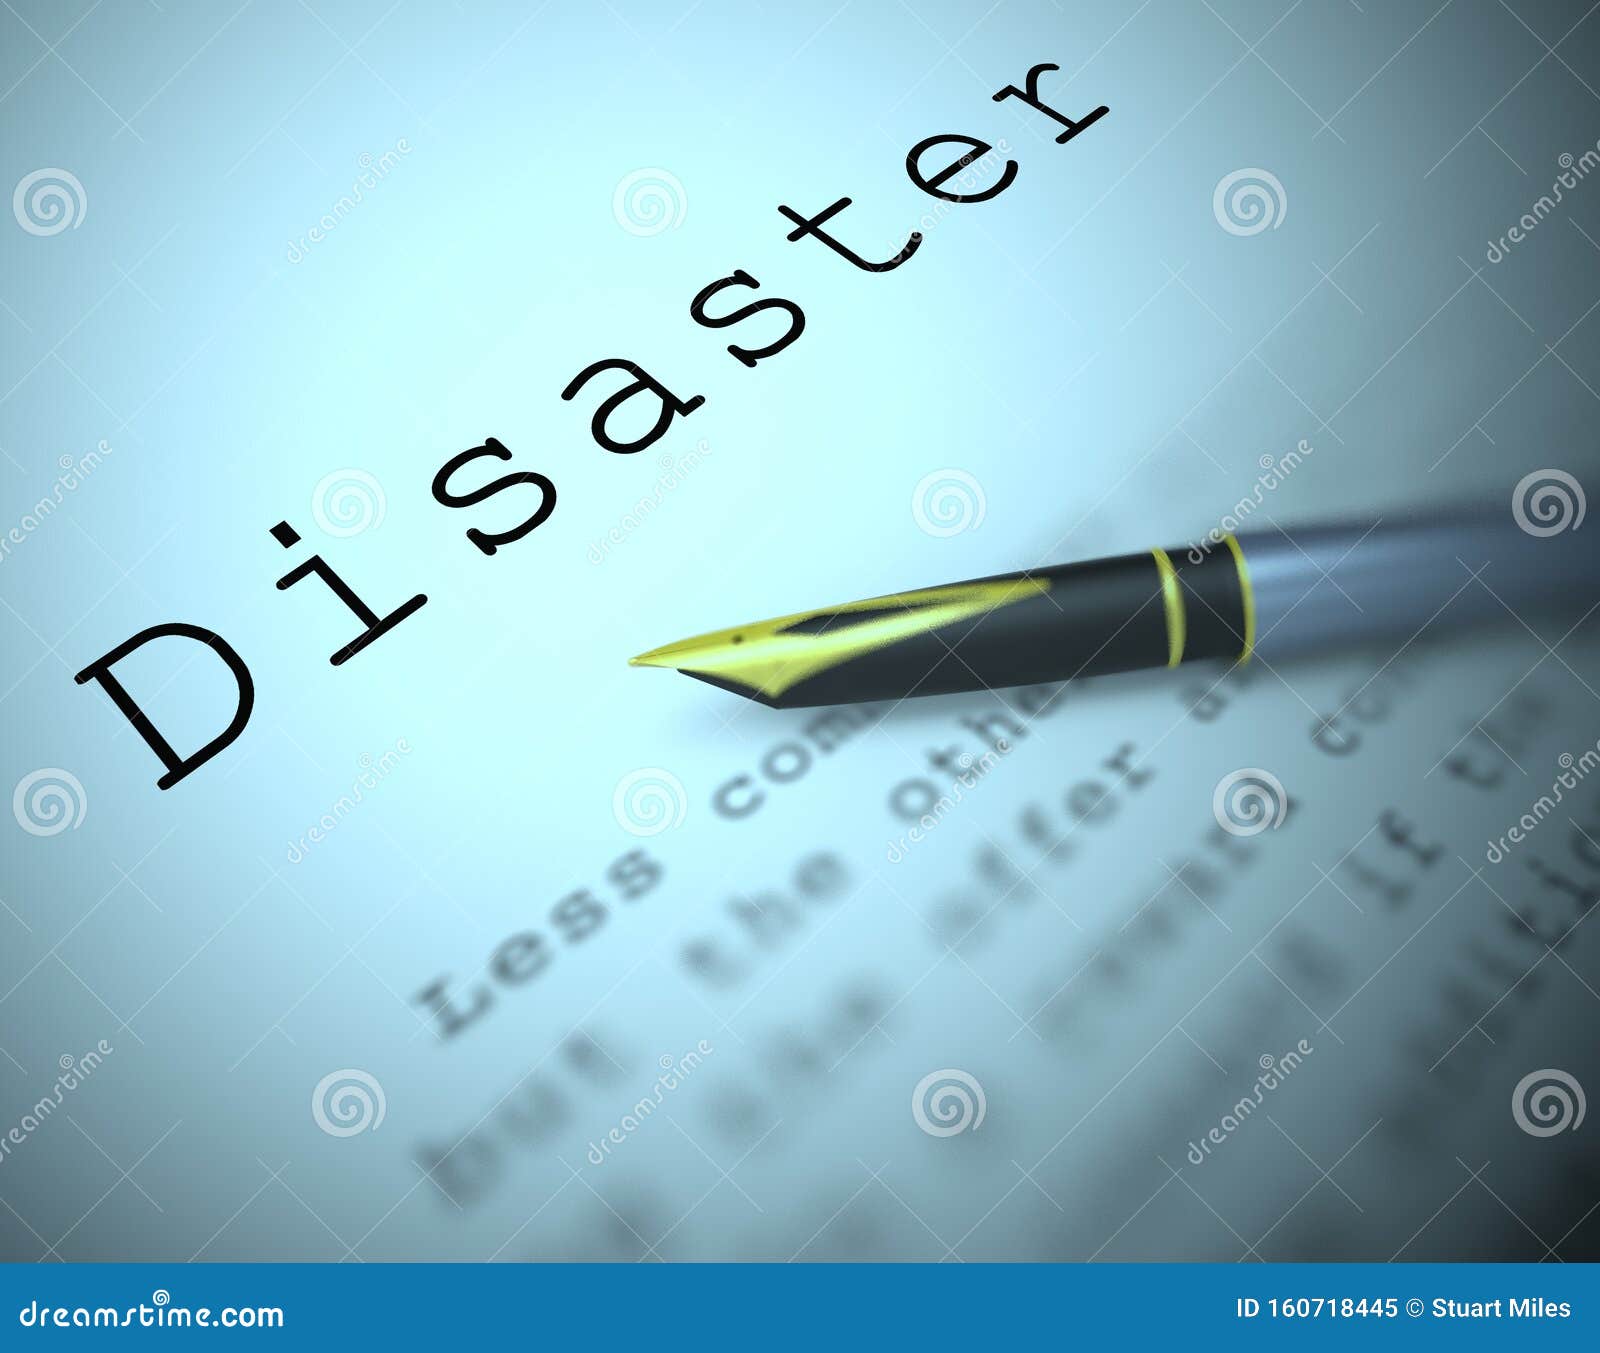 disaster definition means calamity and misfortune - 3d 